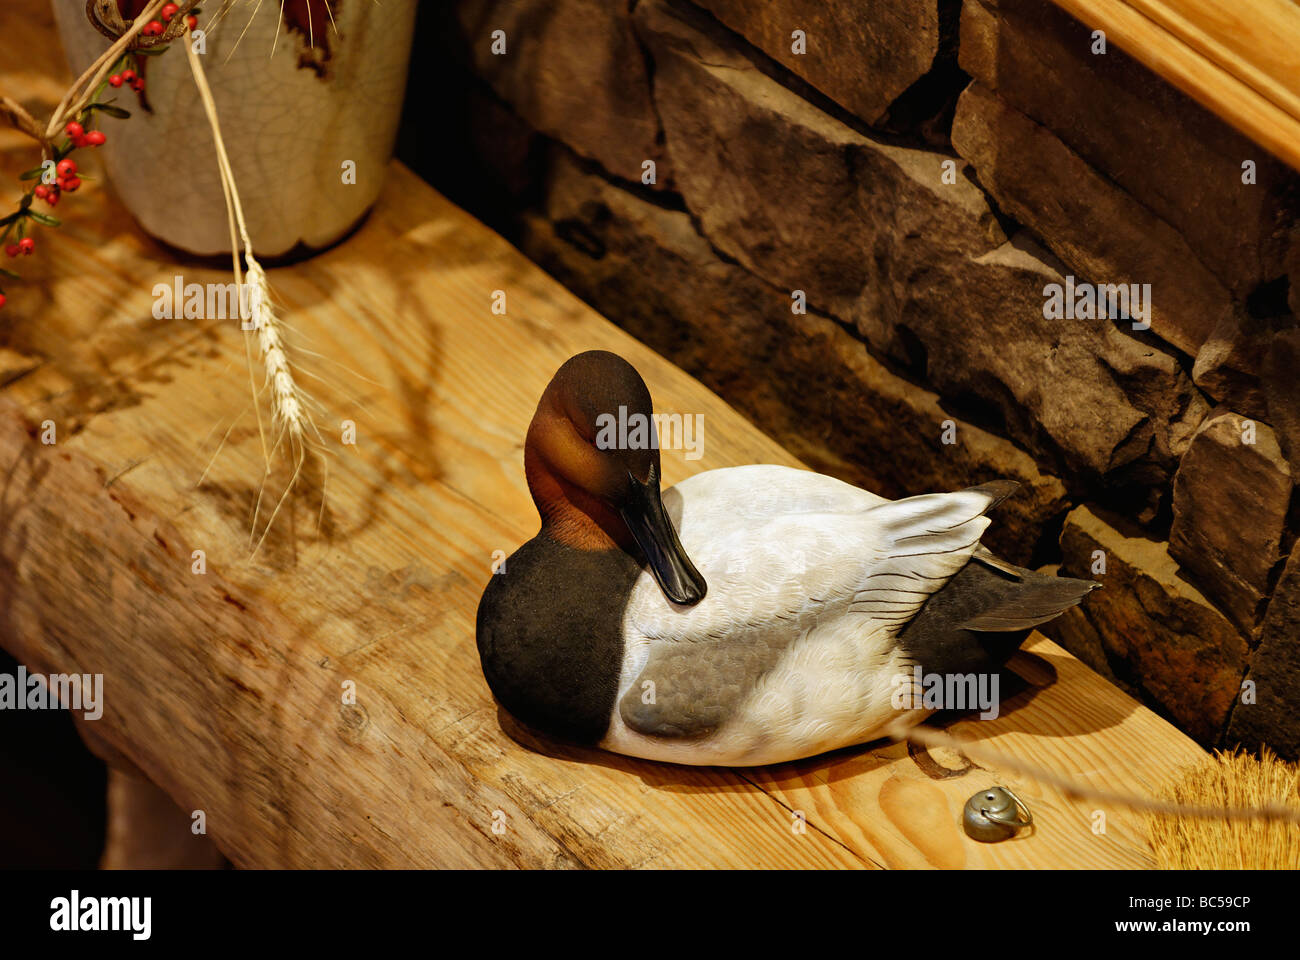 Decoy of Canvasback Duck on Rustic Wood Mantel Stock Photo